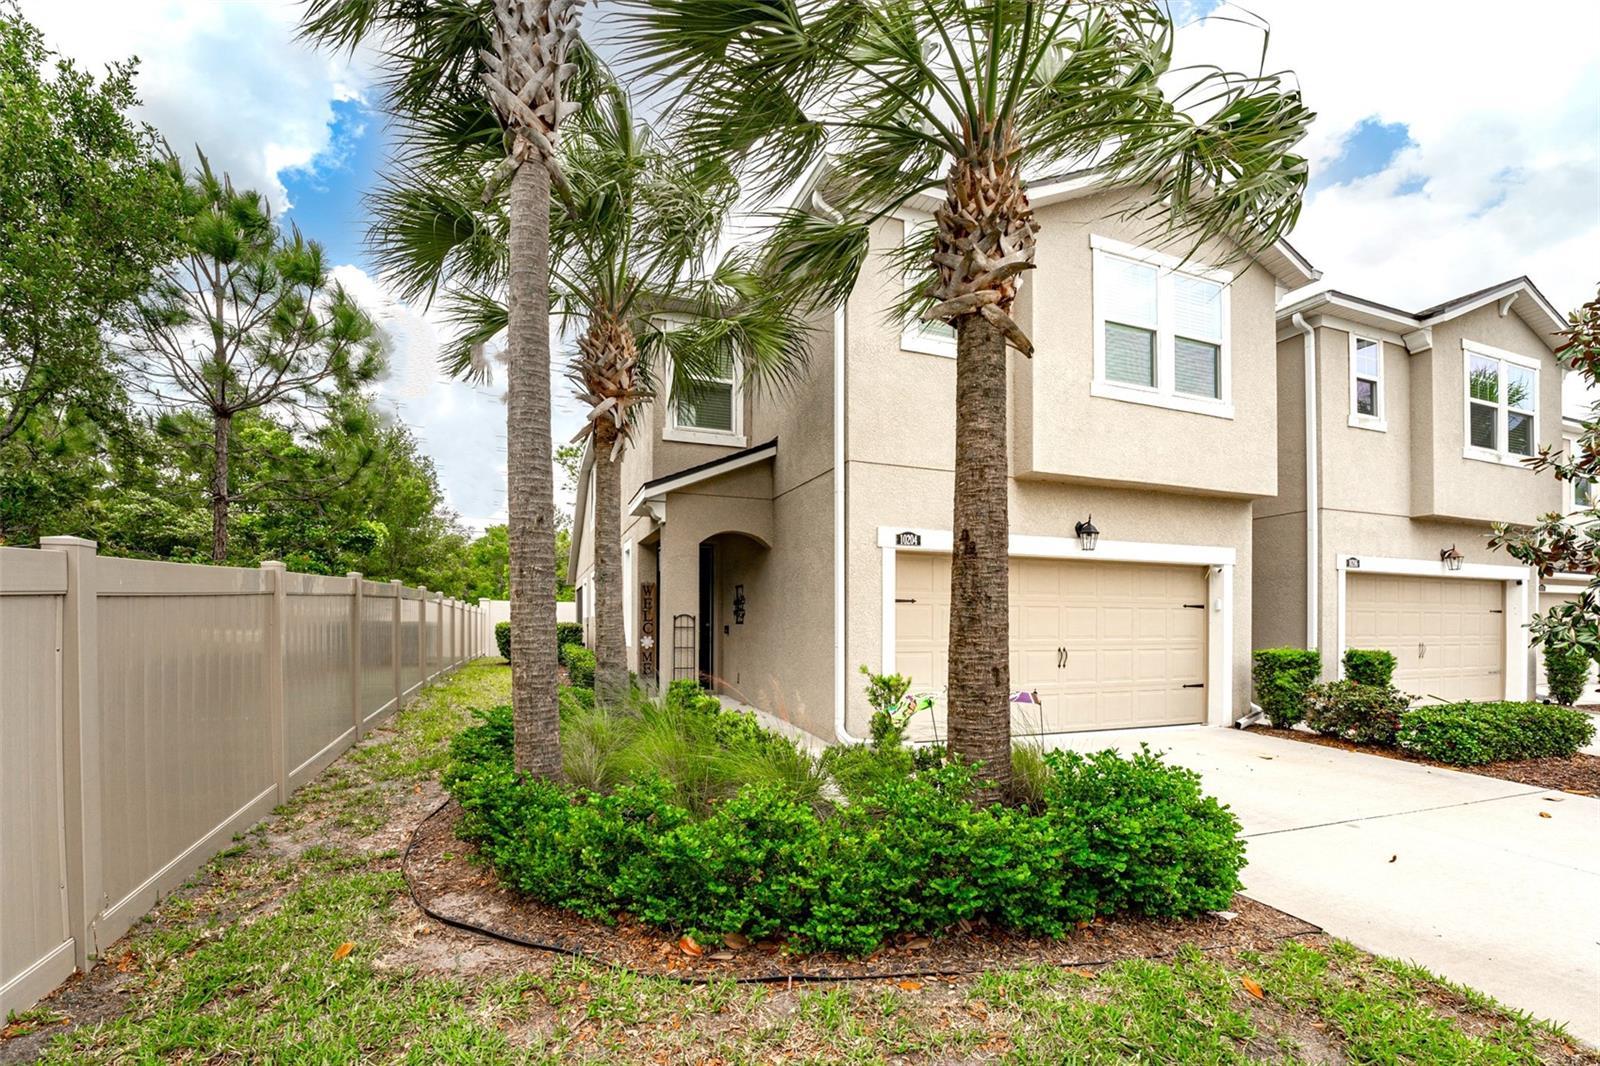 Photo one of 10204 Holstein Edge Pl Riverview FL 33569 | MLS T3518379